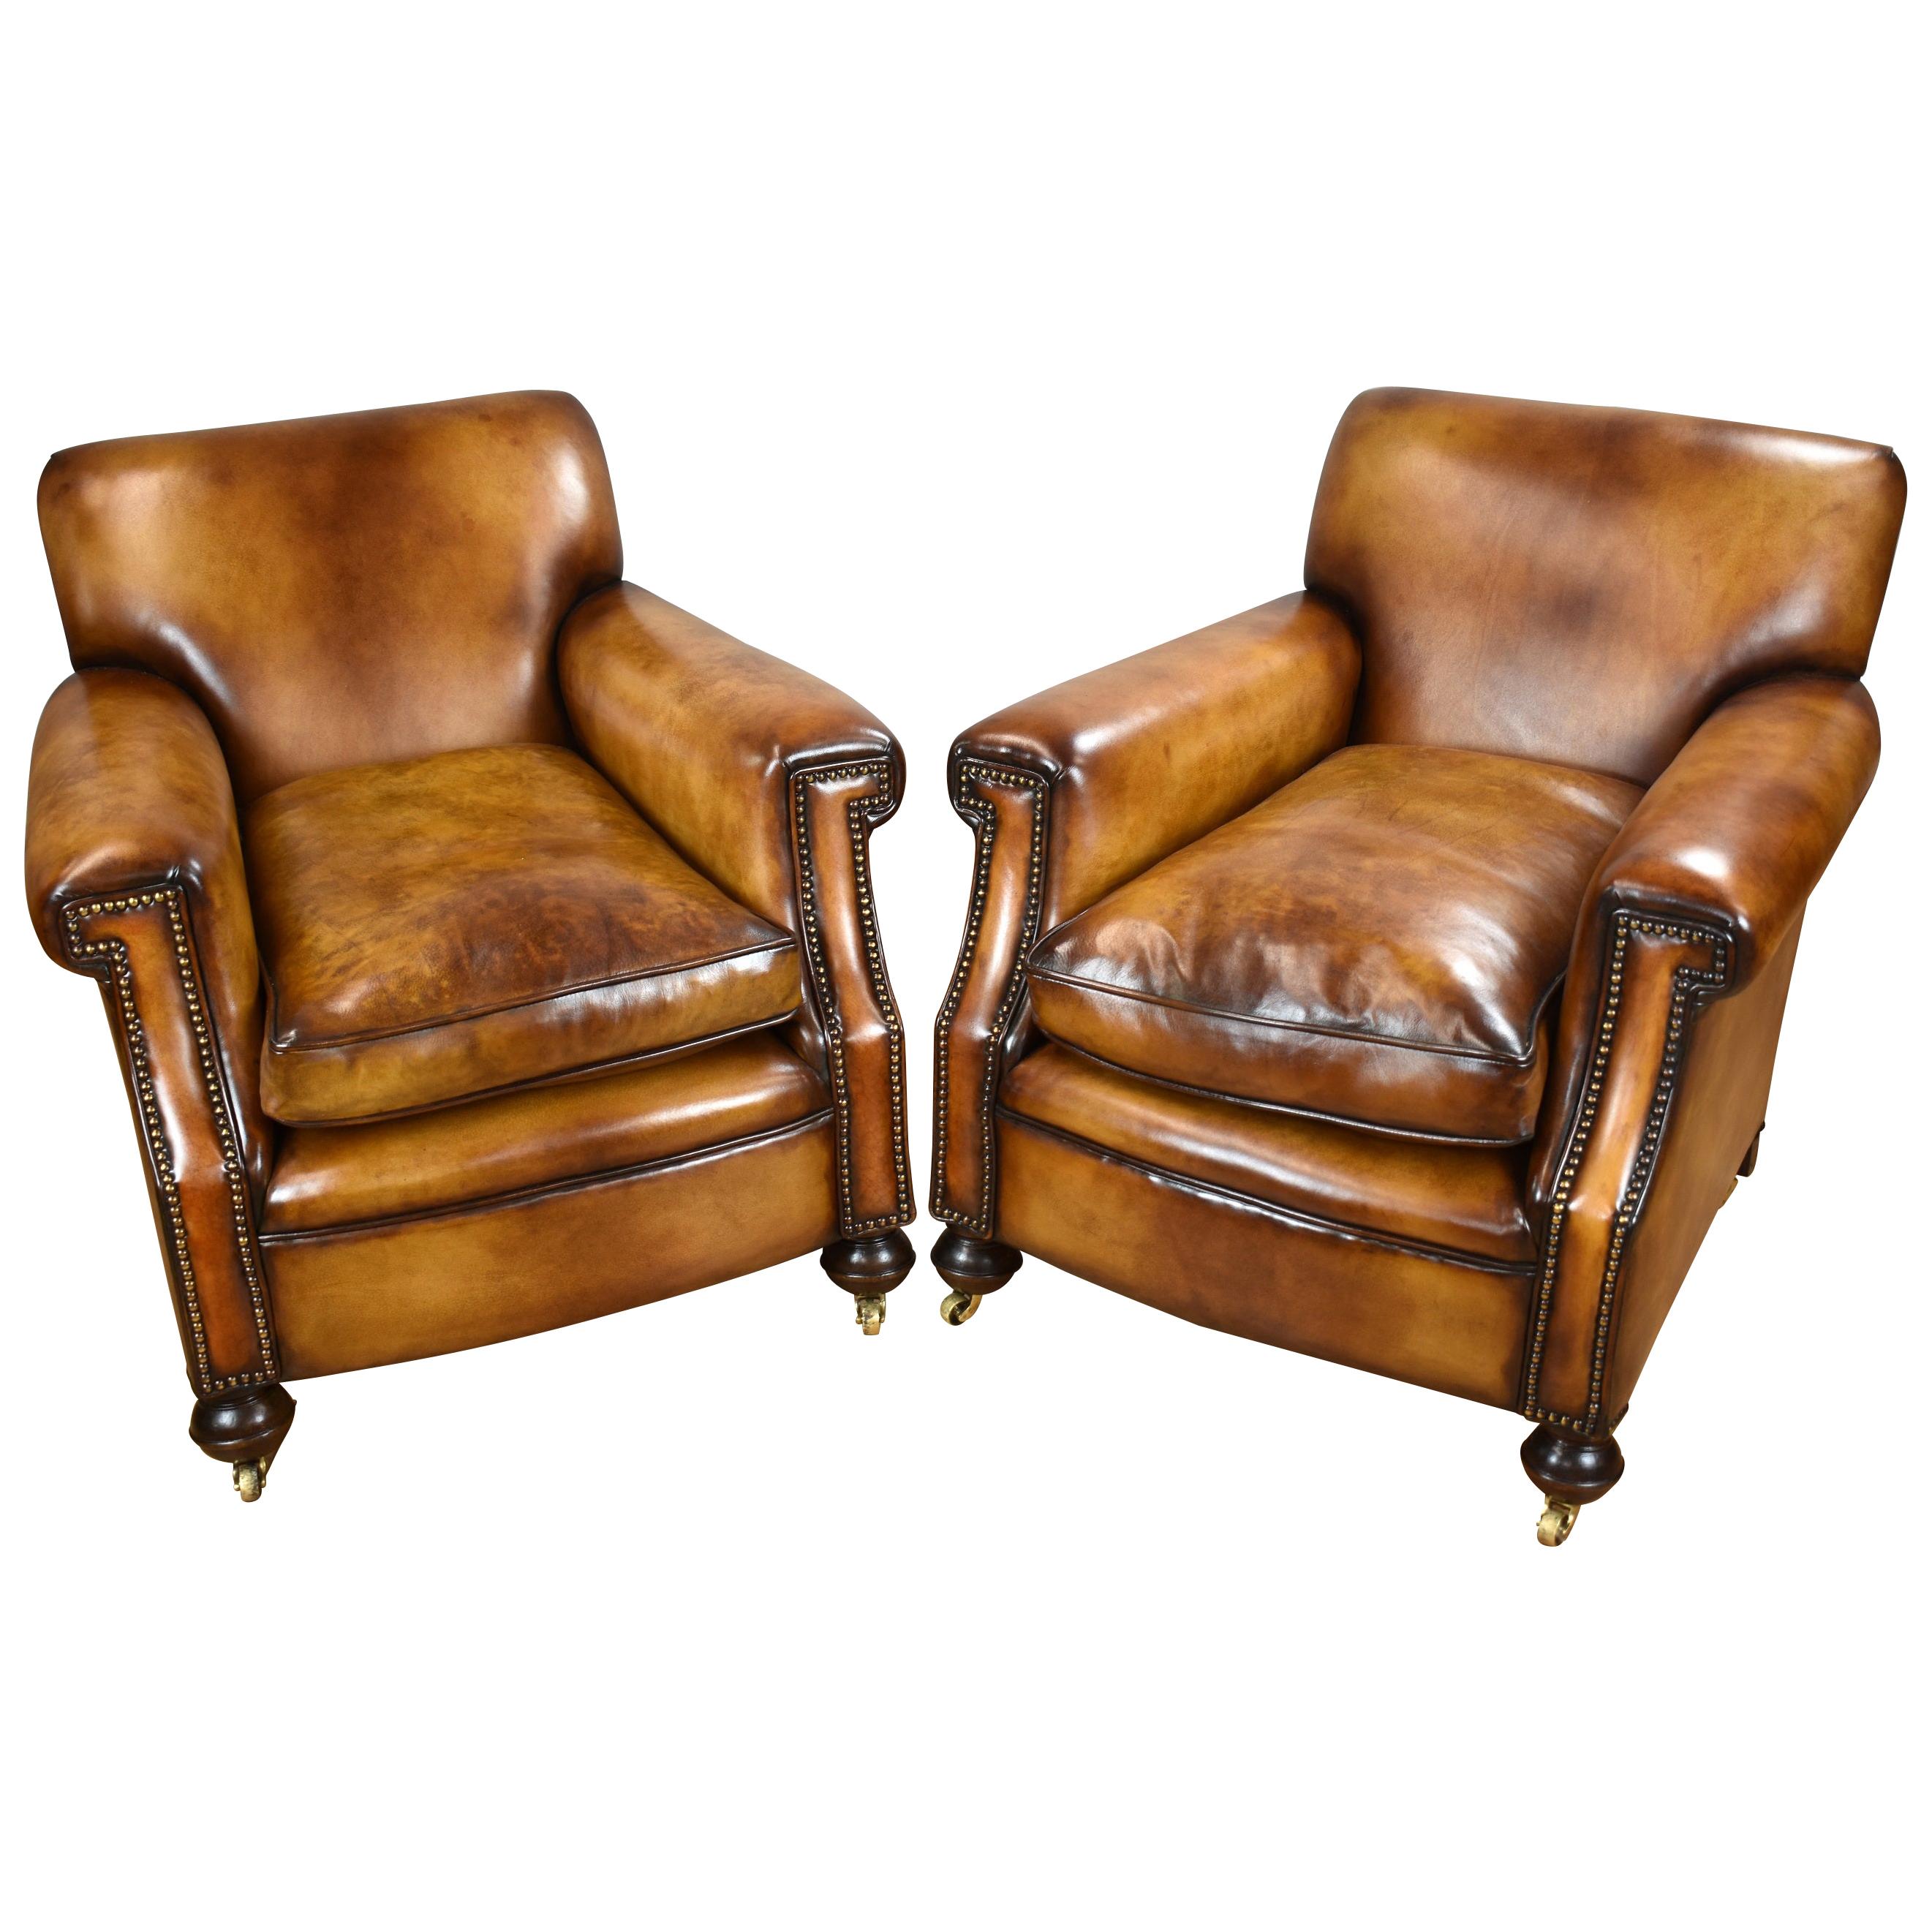 Pair of Early 20th Century English Hand Dyed Leather Club Chairs